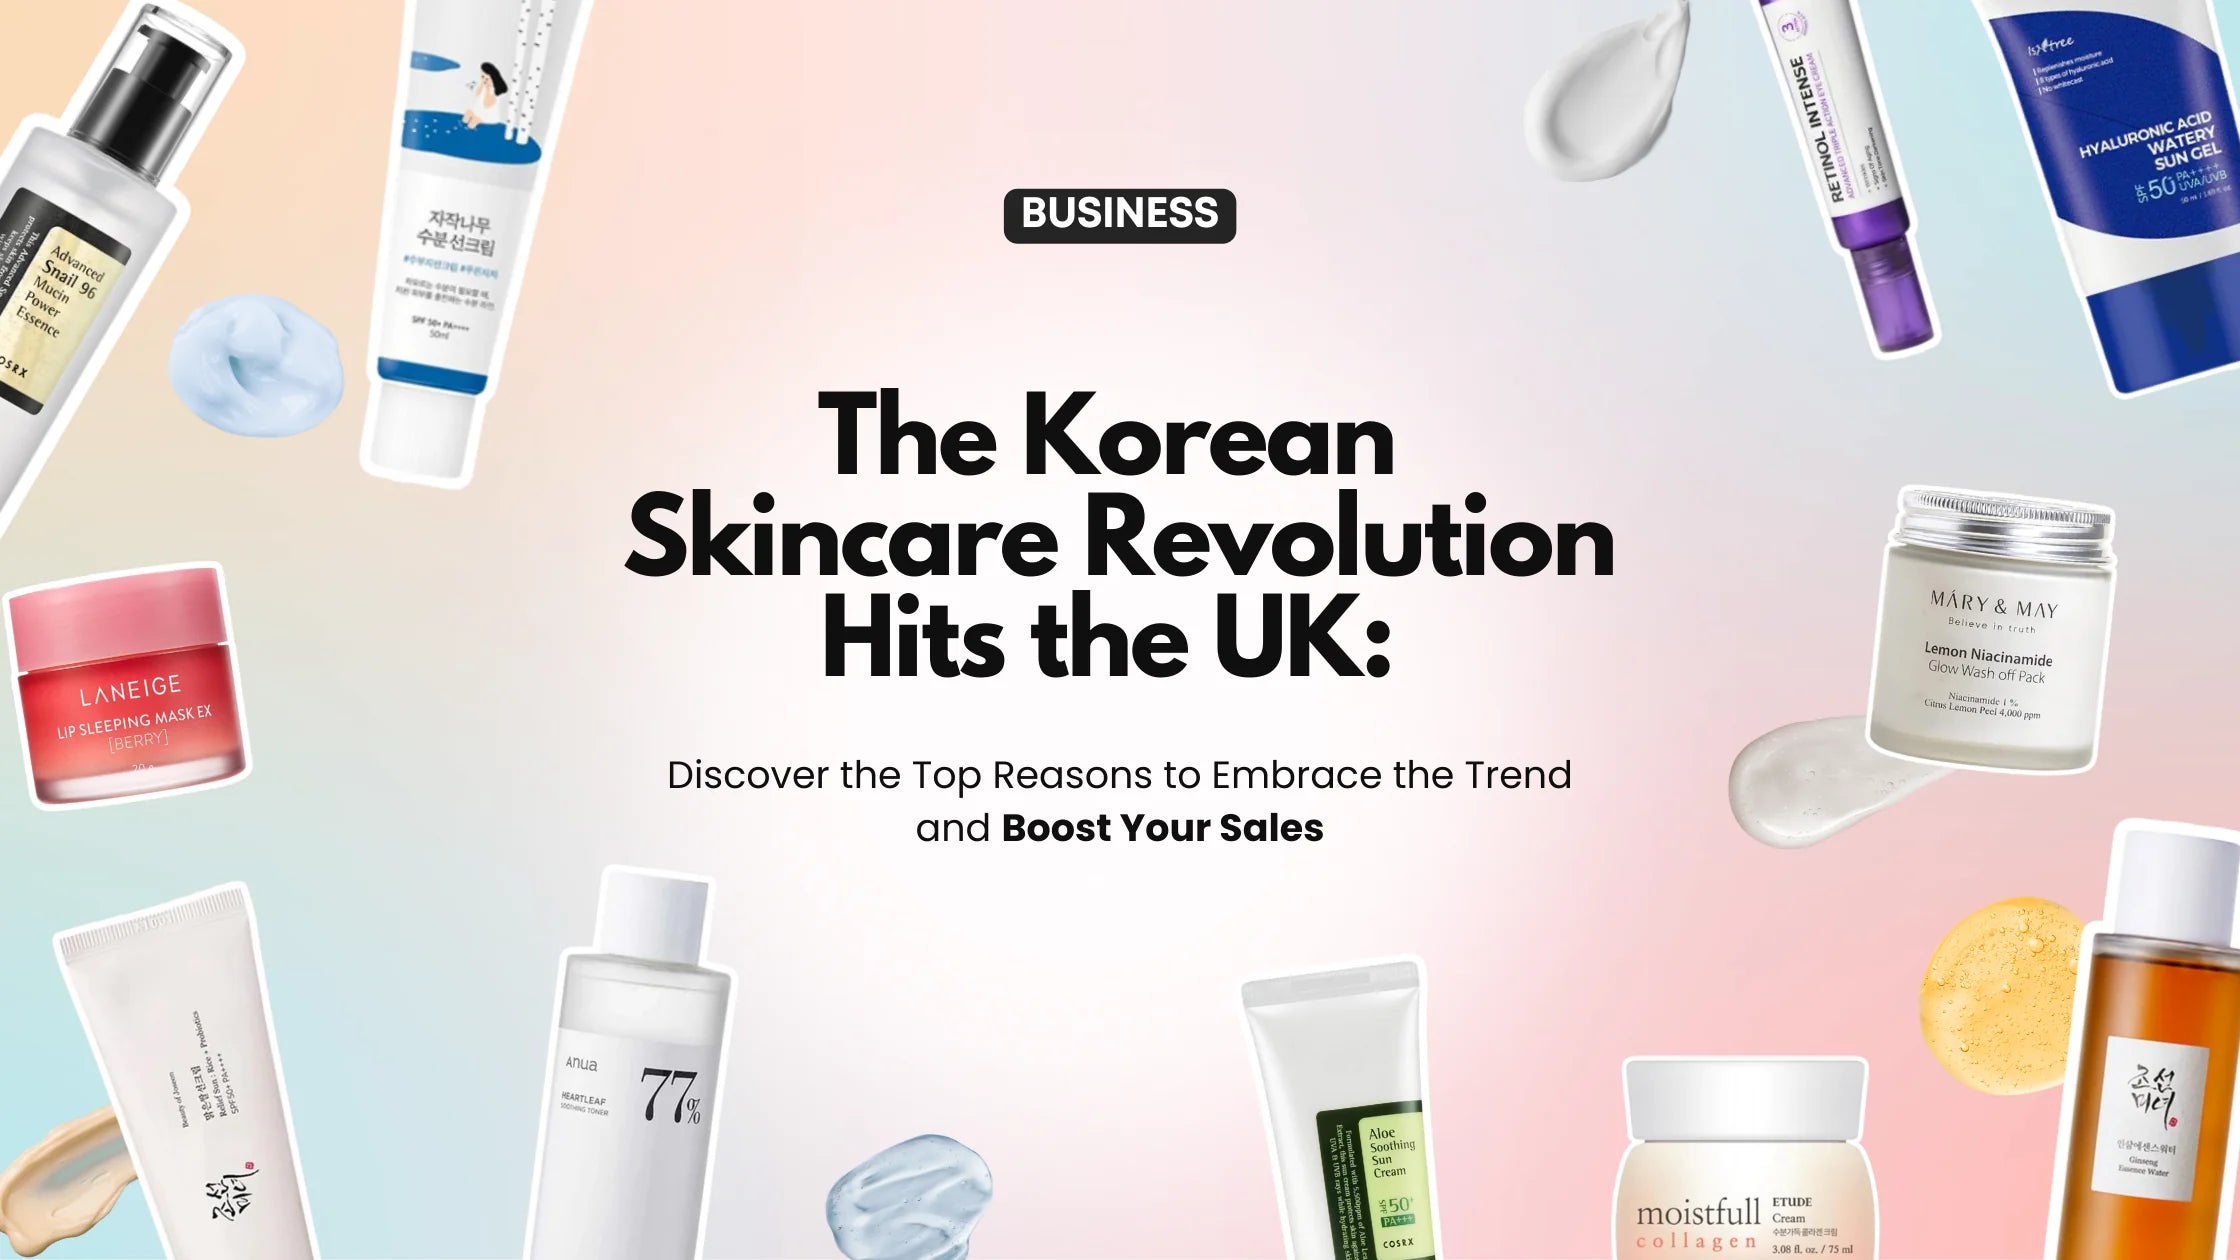 The Korean Skincare Revolution Hits the UK: Discover the Top Reasons to Embrace the Trend and Boost Your Sales